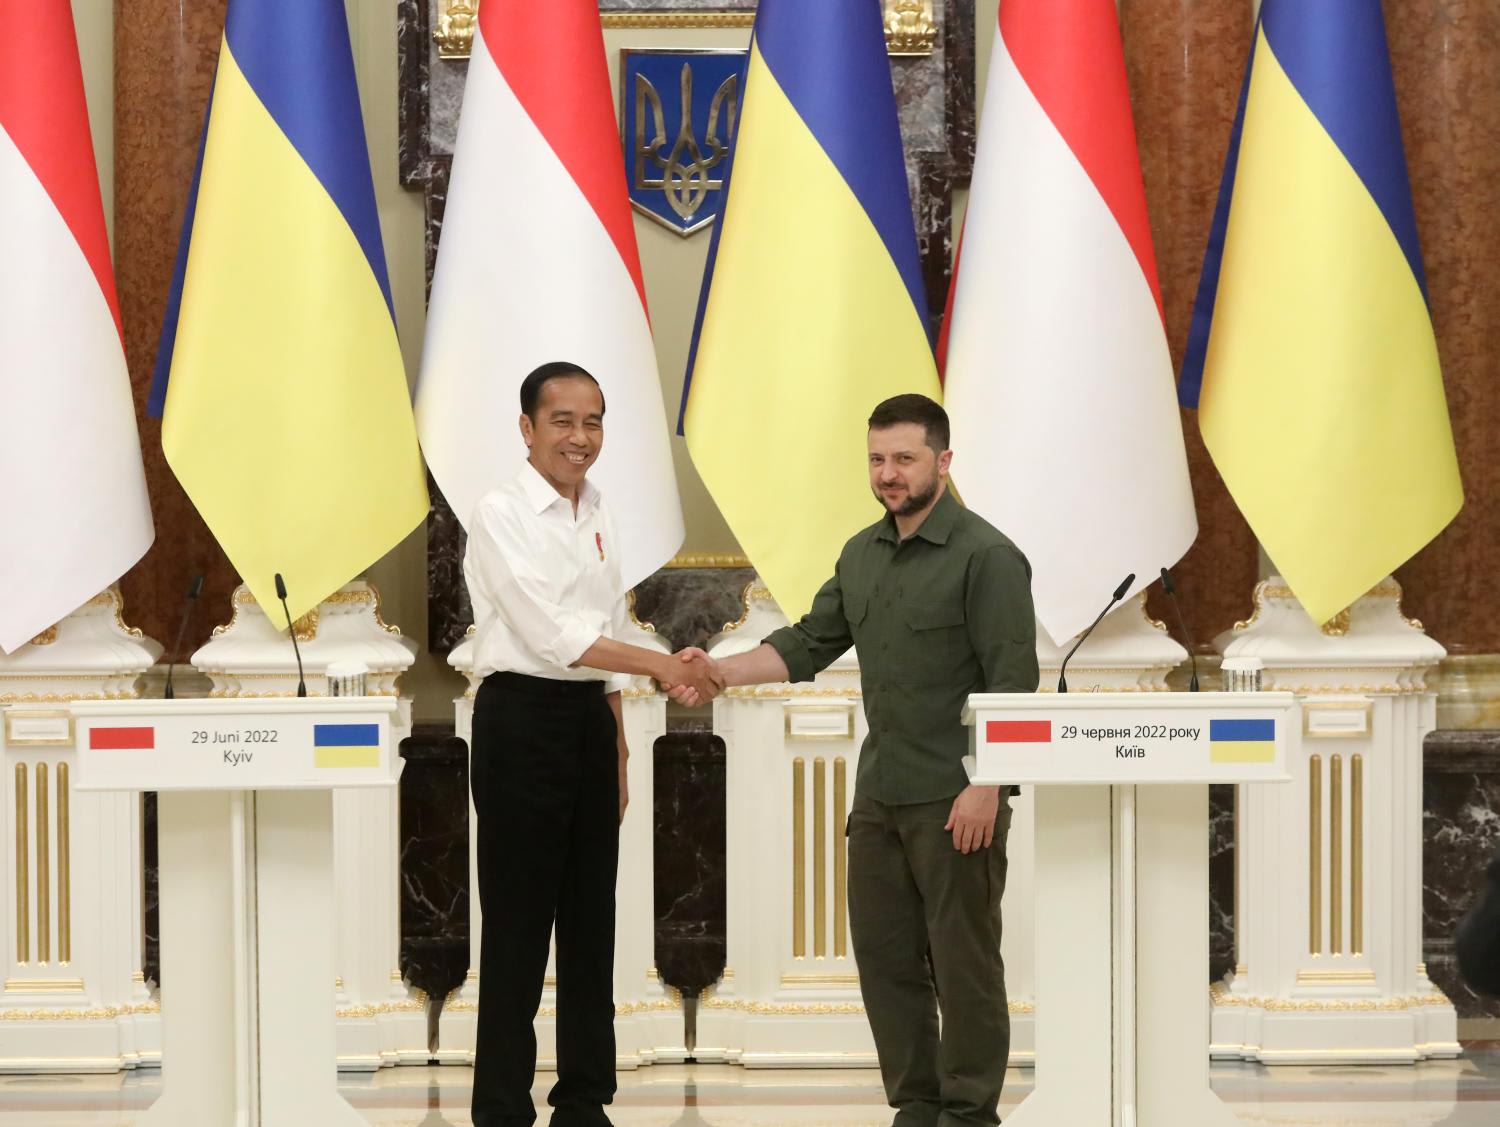 Presidents of Ukraine Volodymyr Zelenskyy (right) and Indonesia Joko Widodo are seen during a joint briefing in Kyiv, capital of Ukraine.